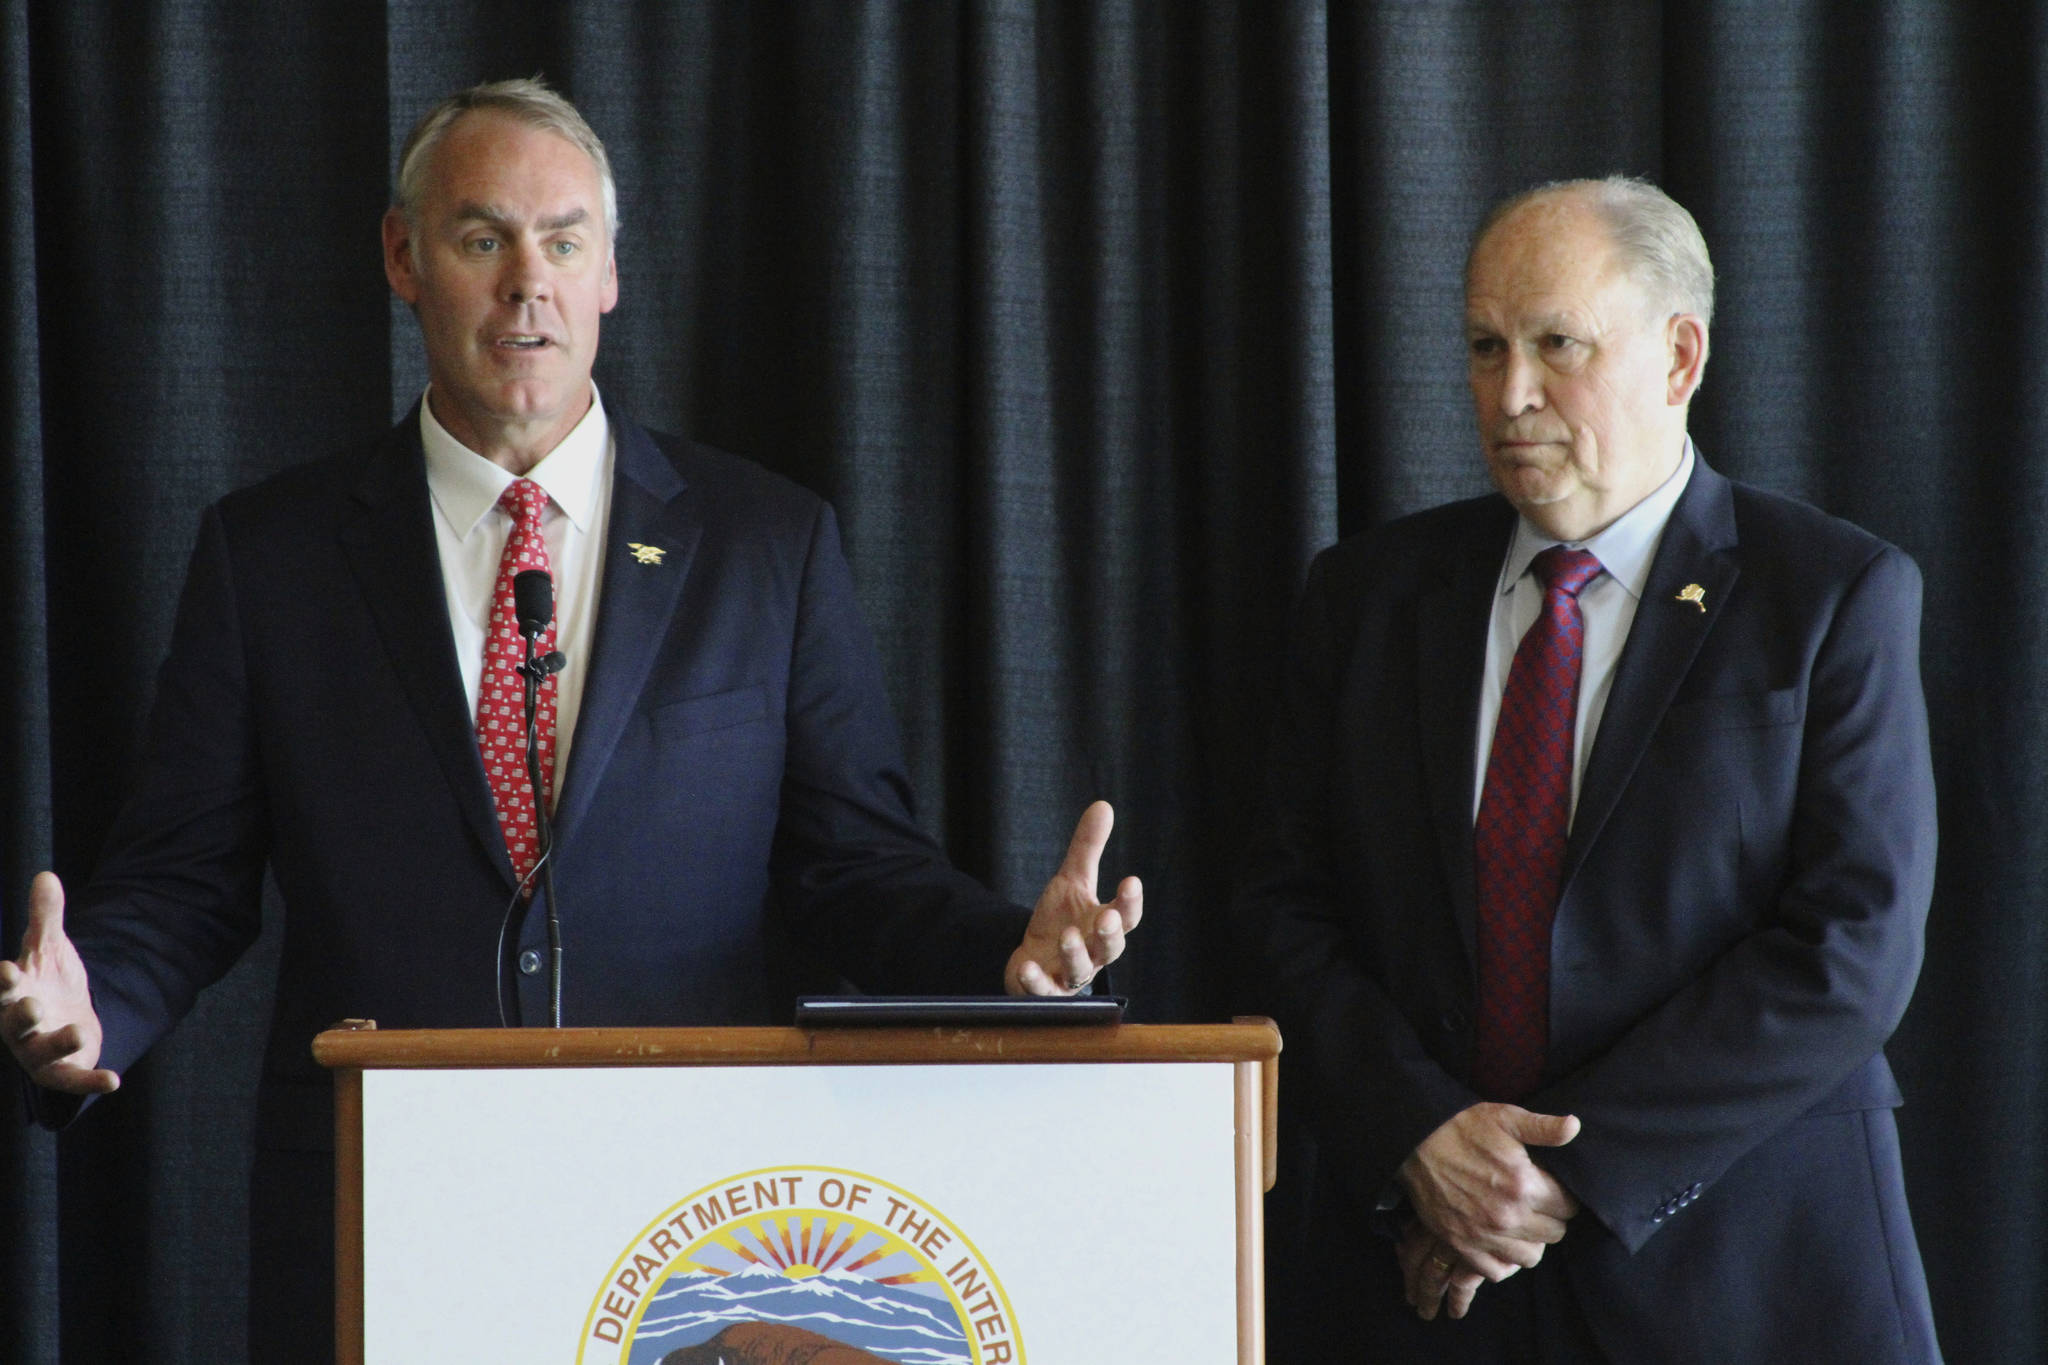 Interior Secretary Ryan Zinke, left, with Alaska Gov. Bill Walker, speaks during a news conference Wednesday, May 31, 2017, in Anchorage, Alaska. Zinke announced steps during a speech earlier in the day that could lead to expanded petroleum drilling in two areas of northern Alaska where environmental groups want protections for wildlife. (AP Photo/Mark Thiessen)